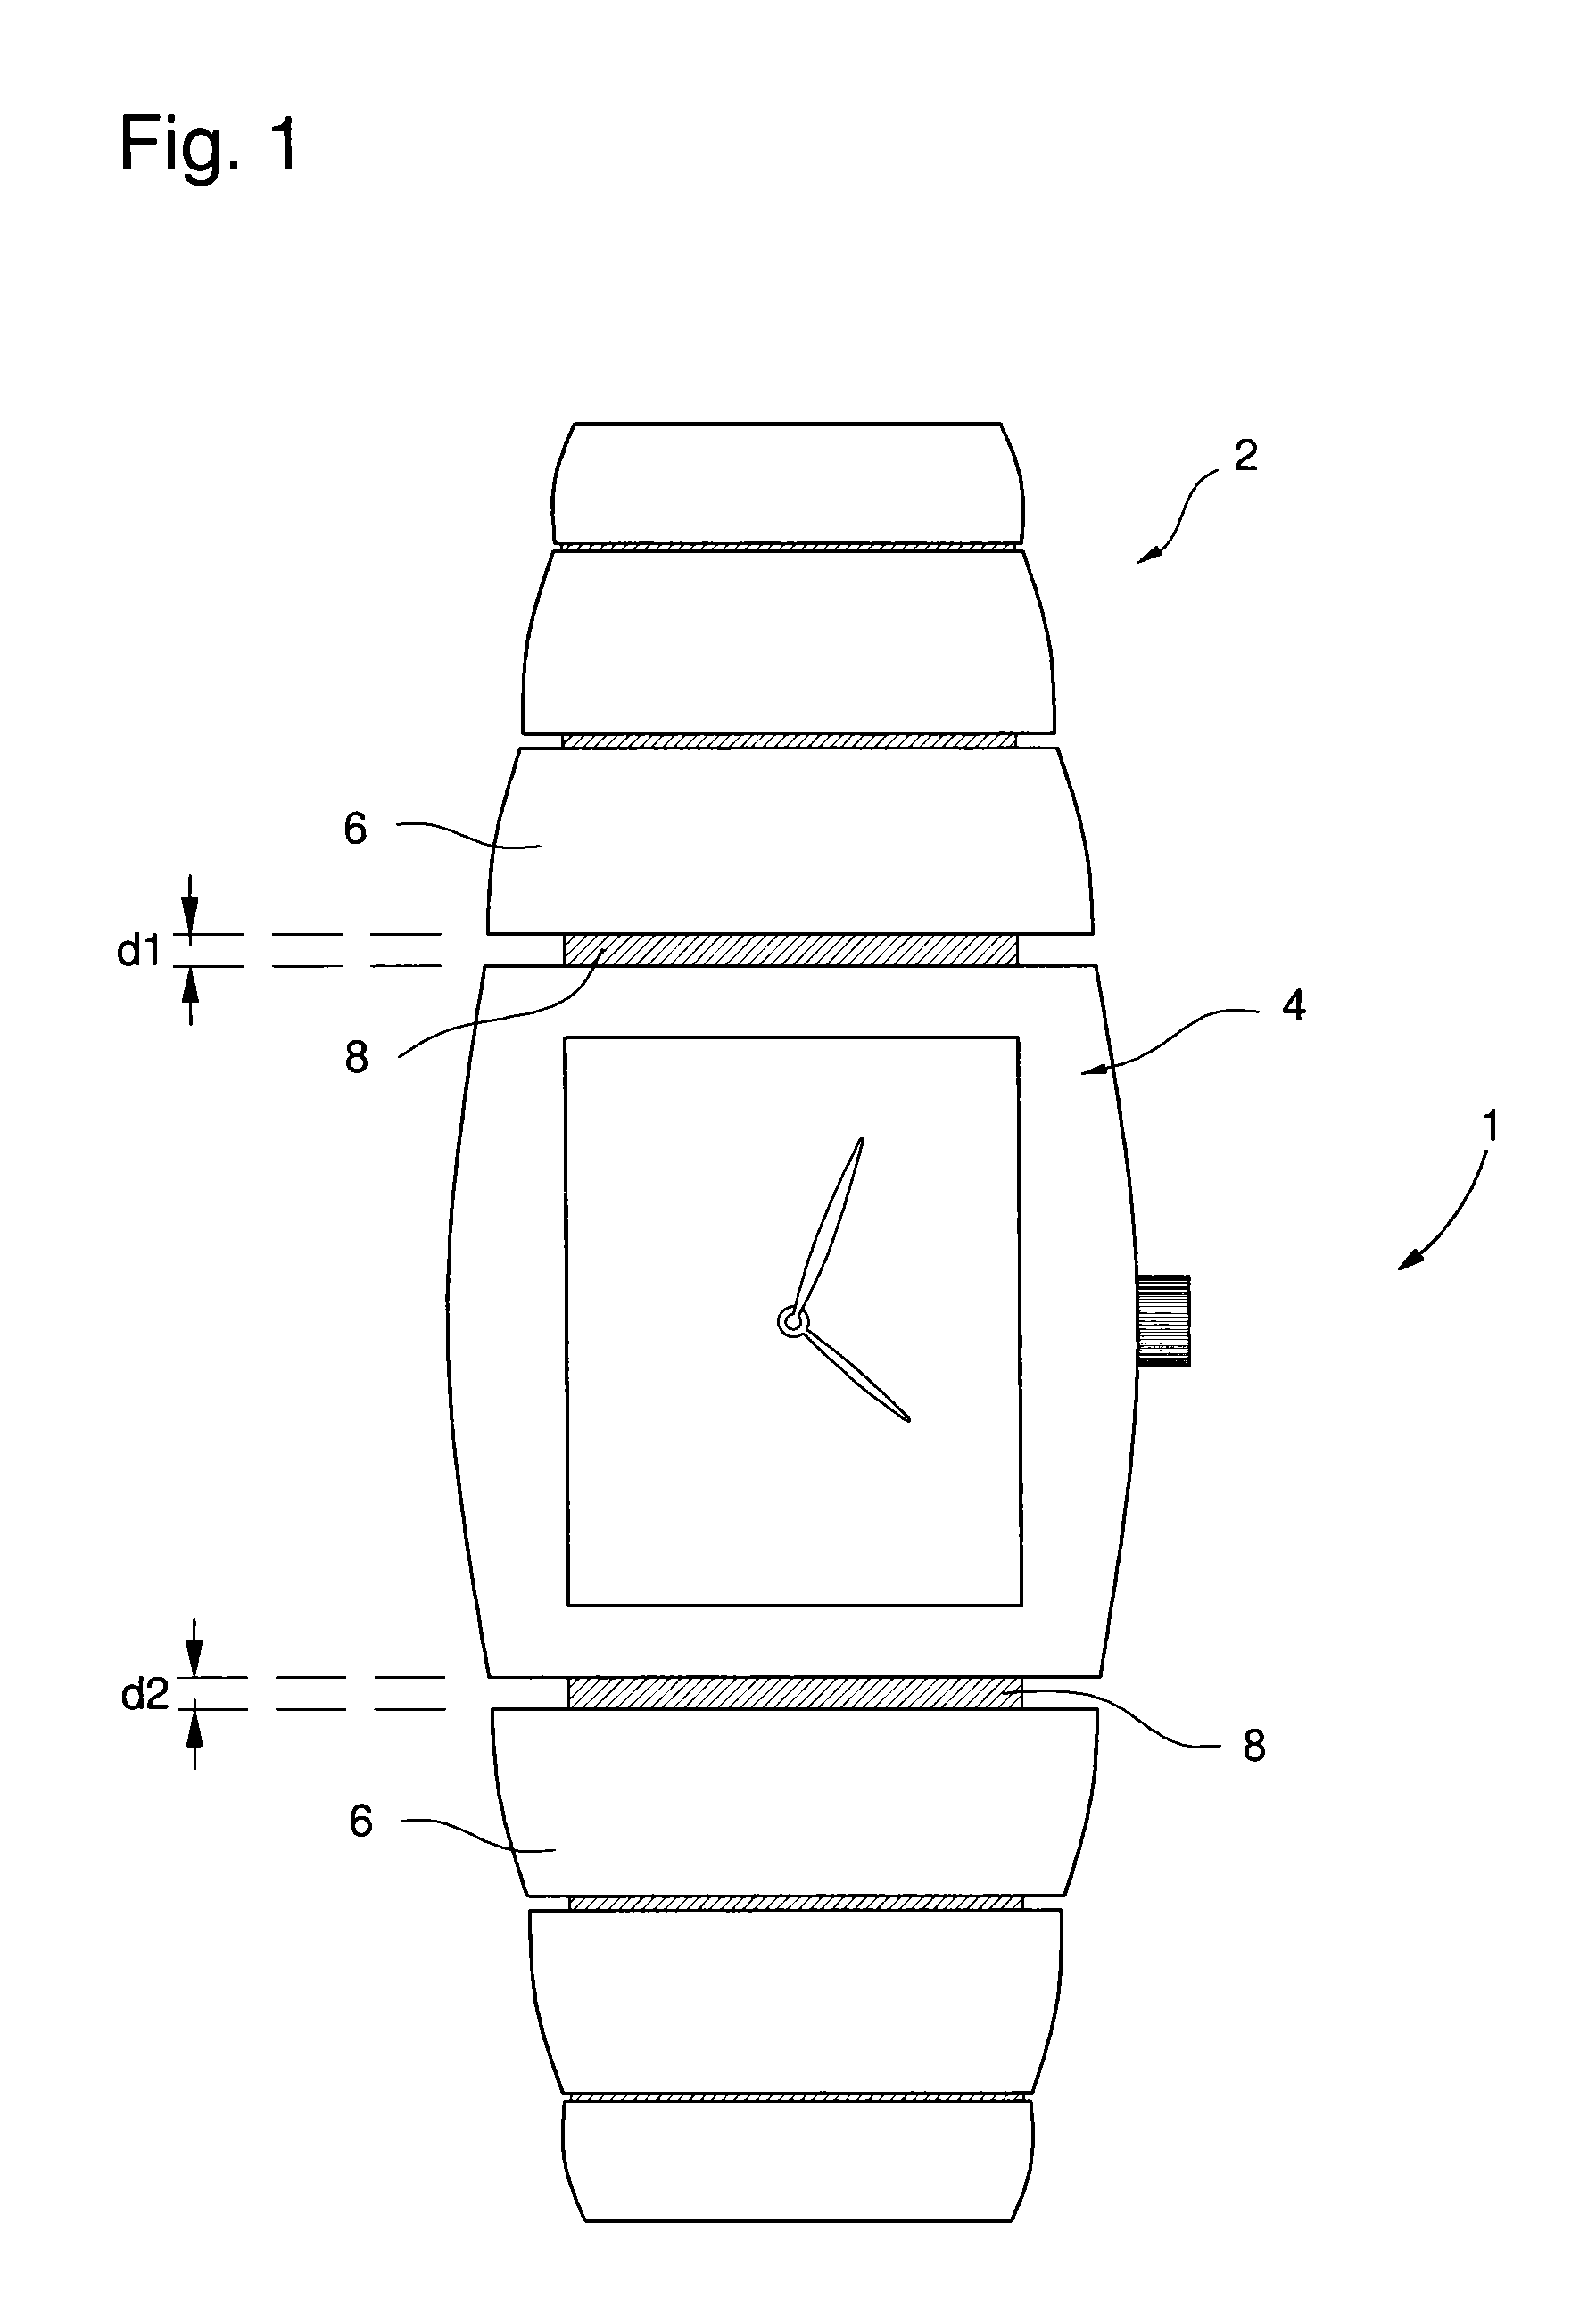 System for connecting a bracelet to a watch case